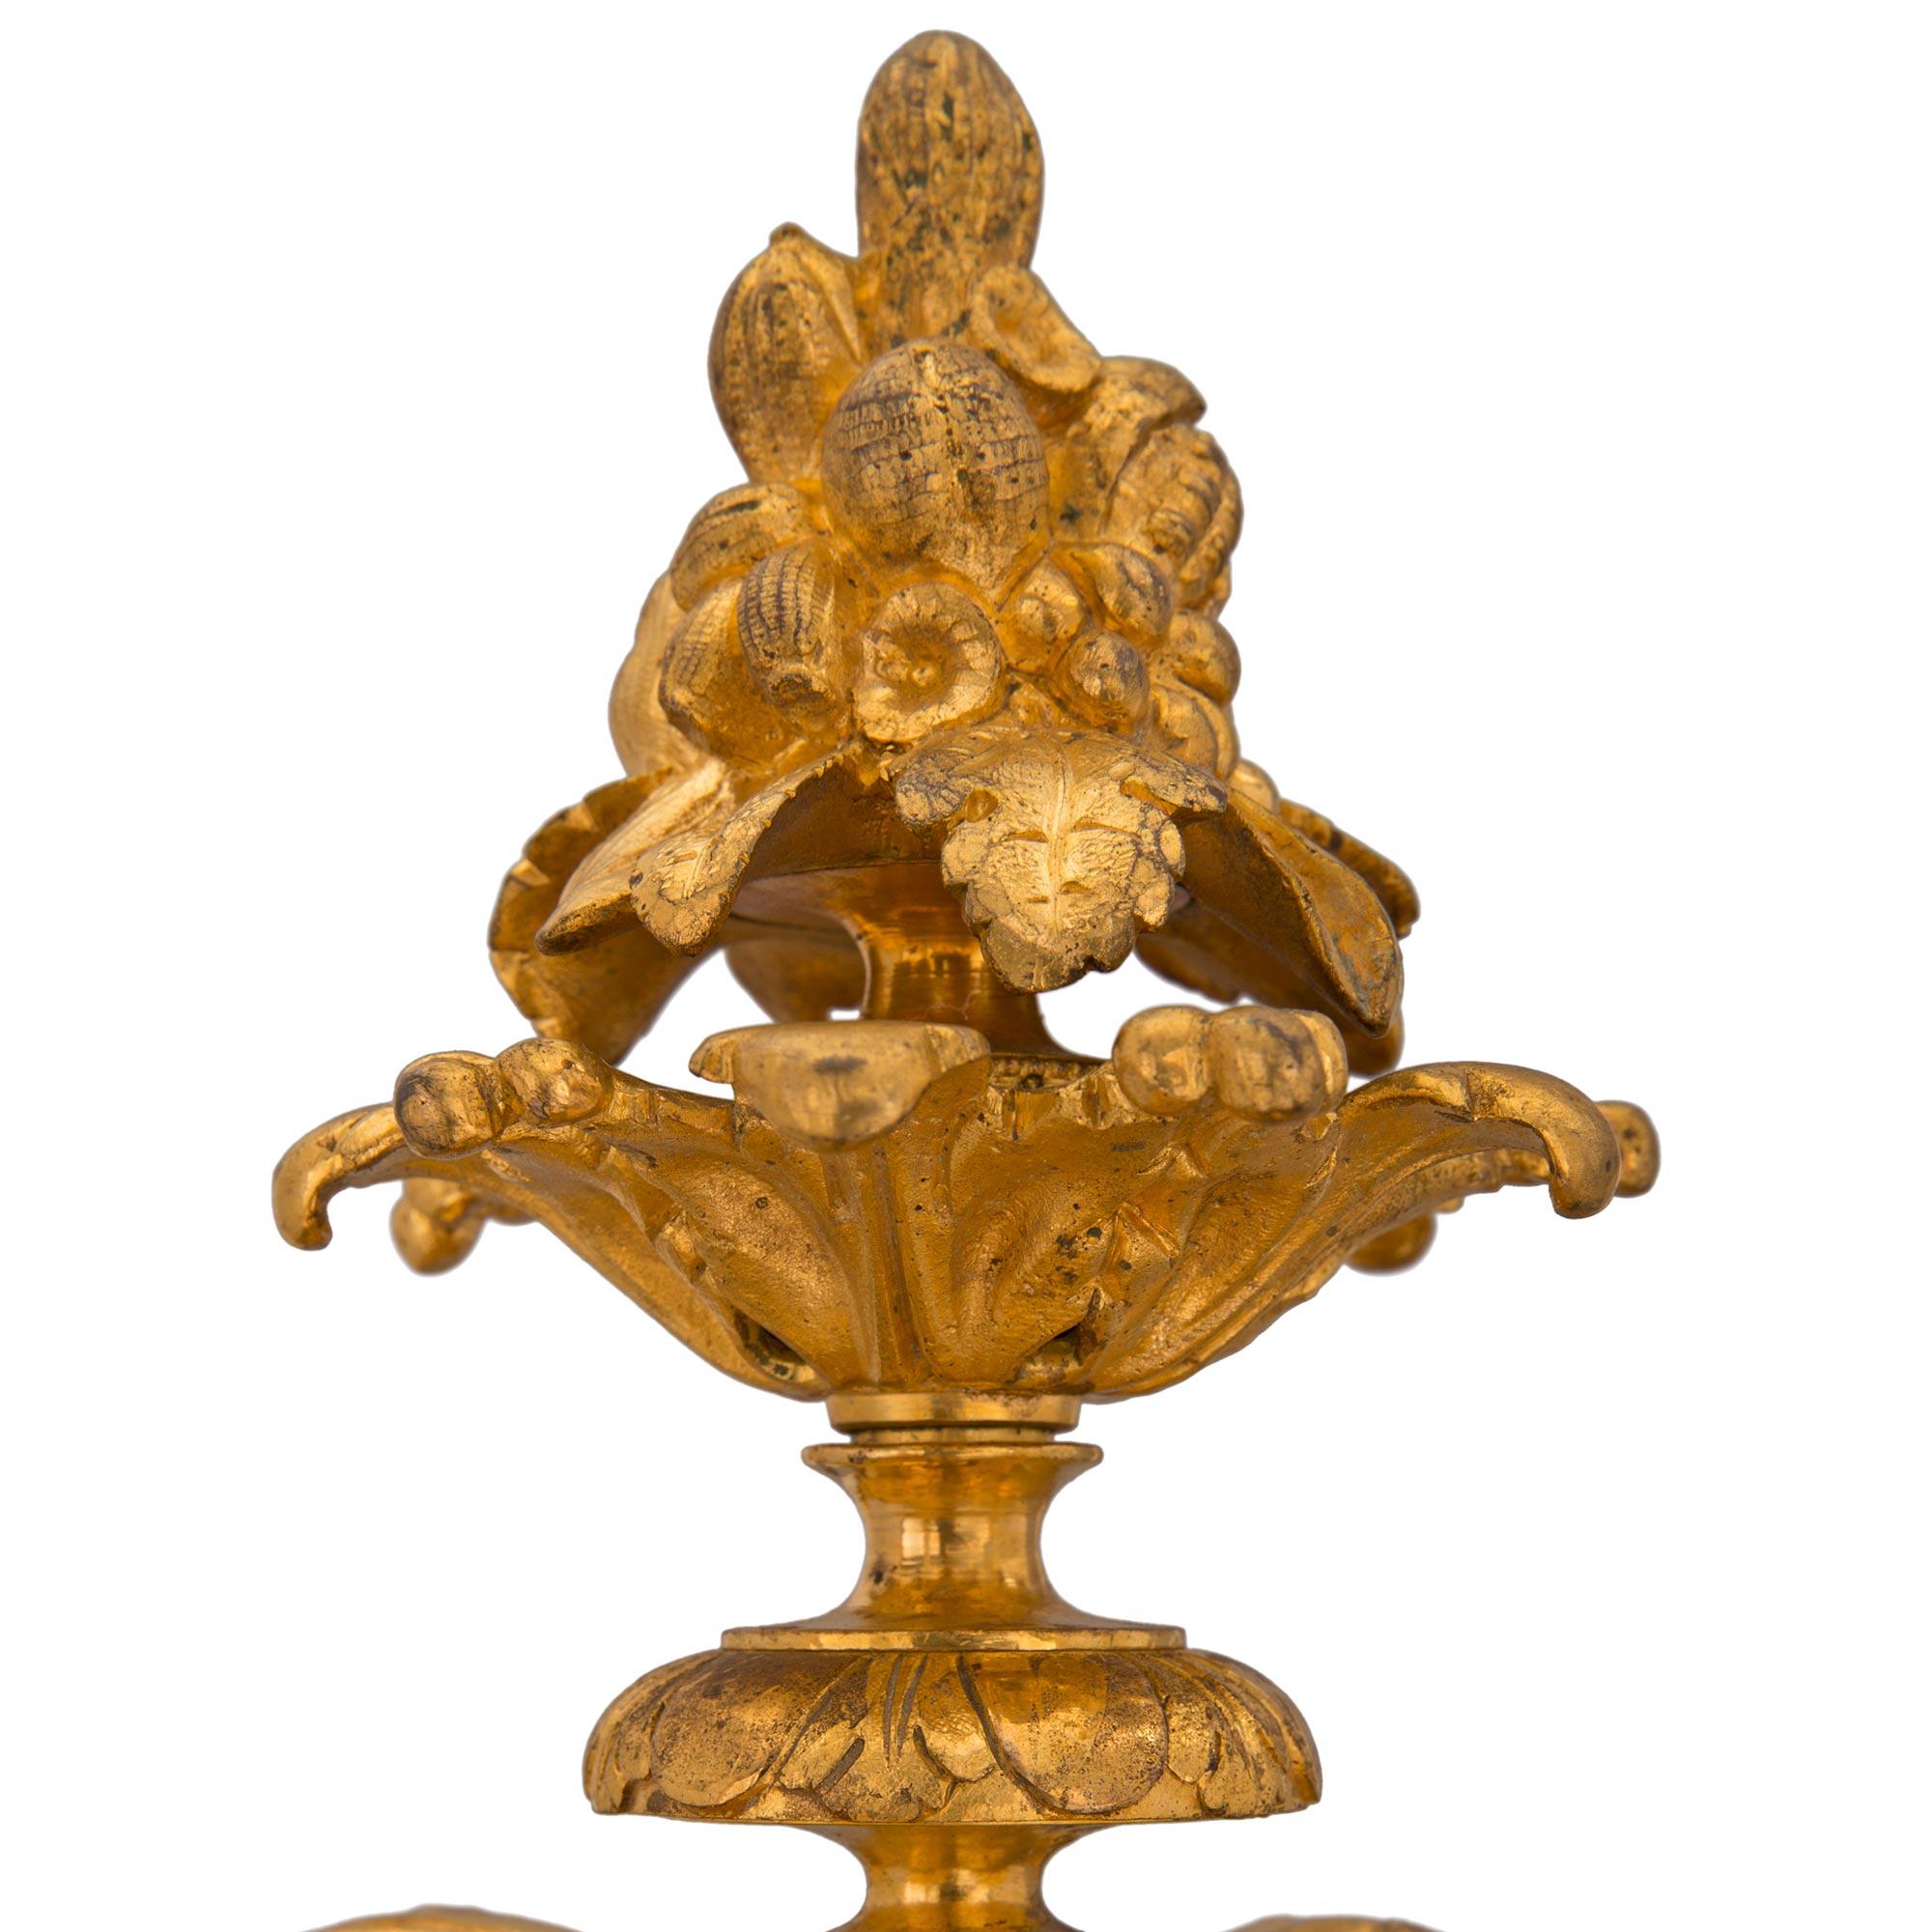 Pair of French Mid-19th Century Patinated Bronze and Ormolu Candelabra Statues For Sale 2